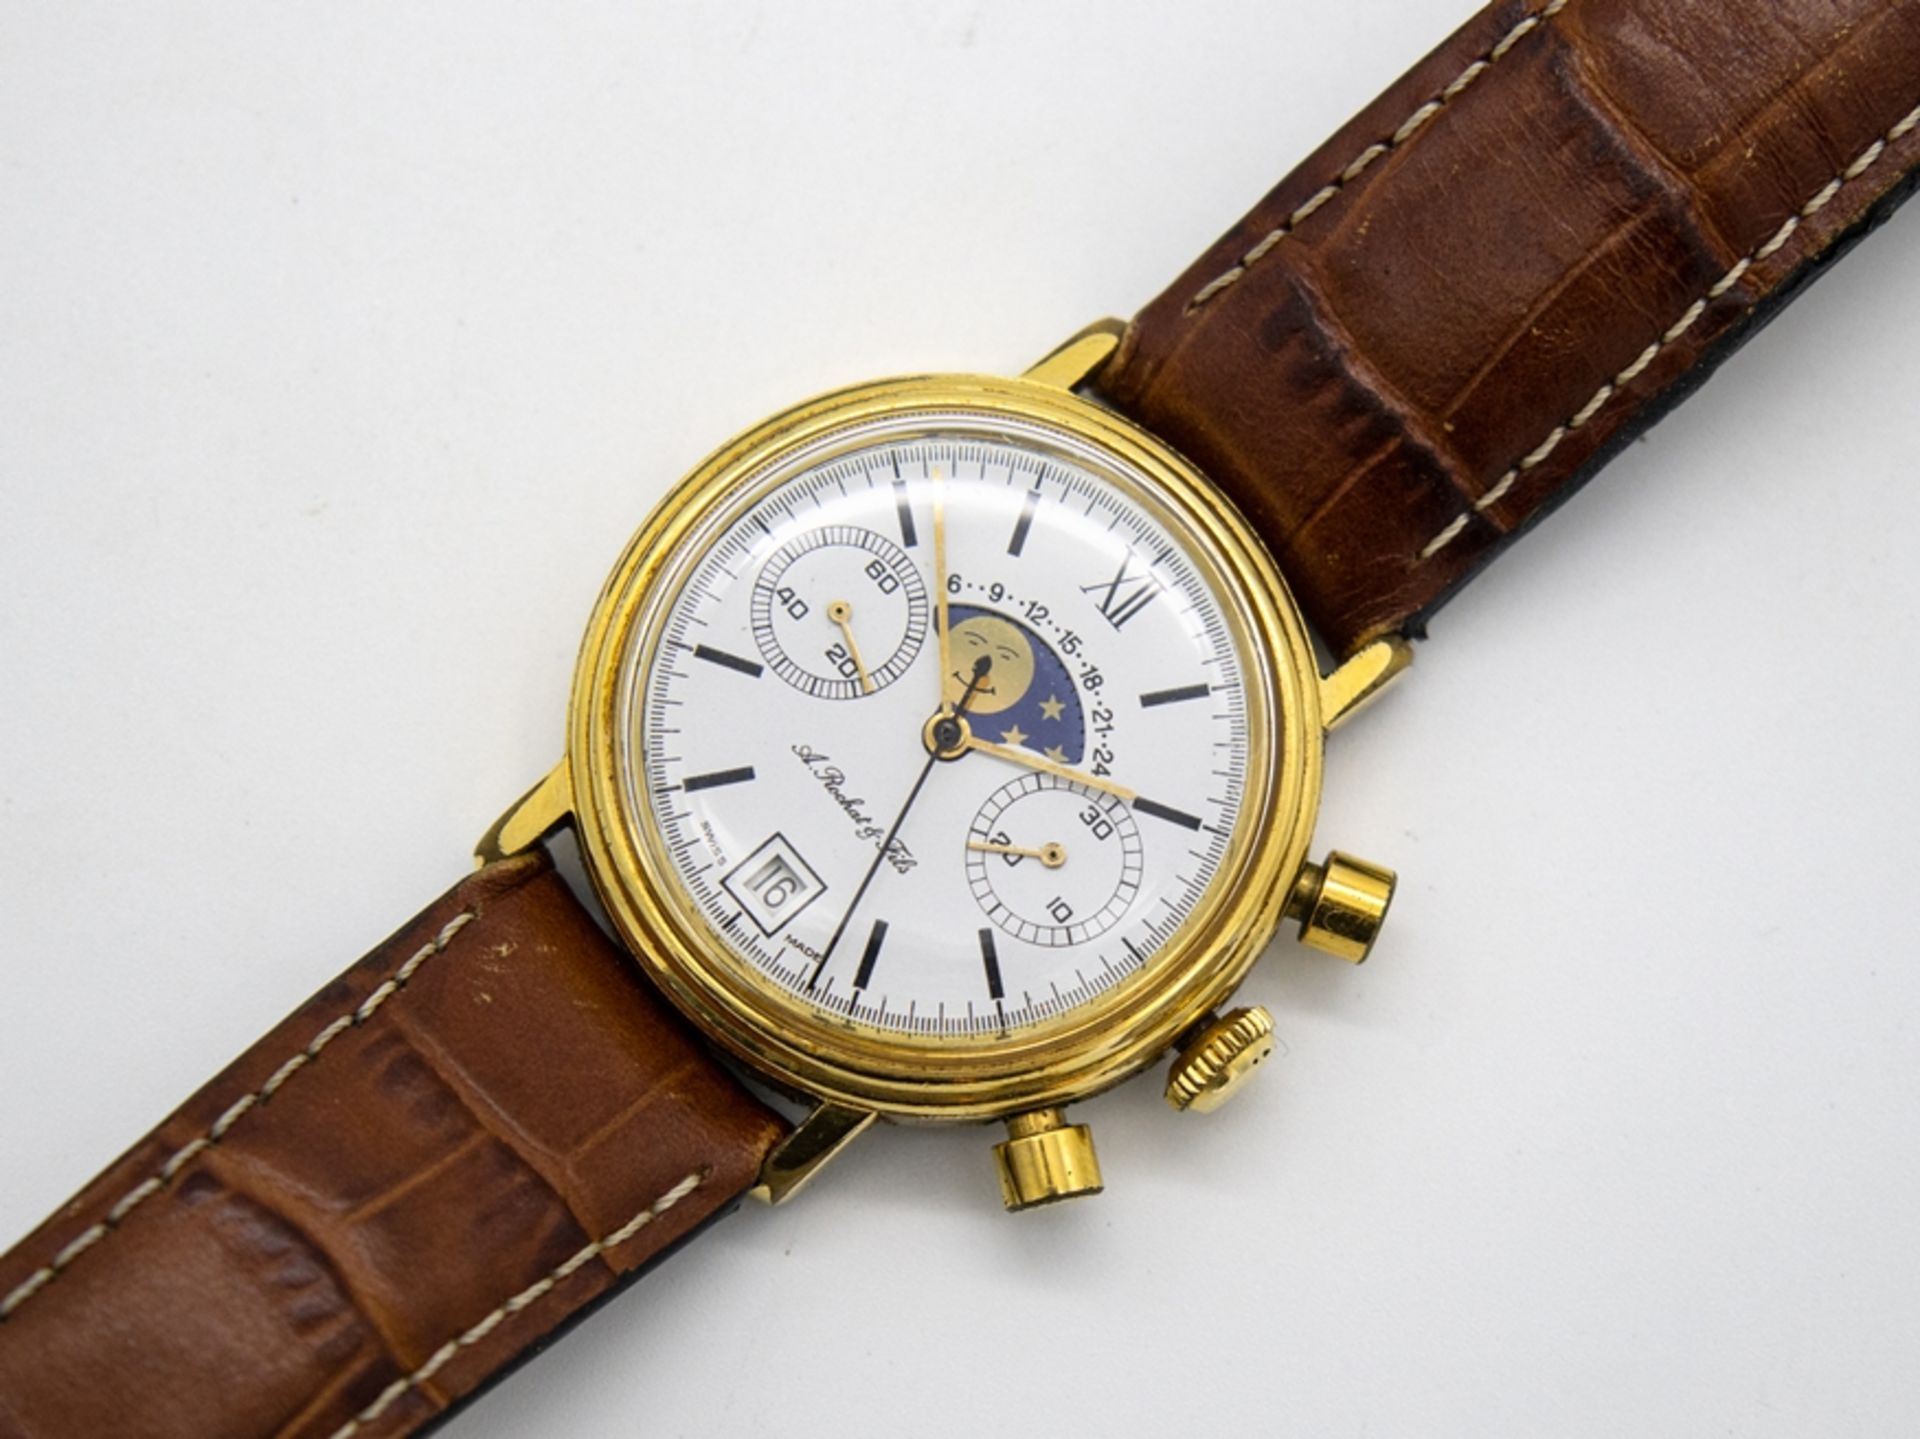 Chronoswiss Alfred Rochat & Fils Lunar Moonphase Ref.: 34.300 - Image 2 of 5